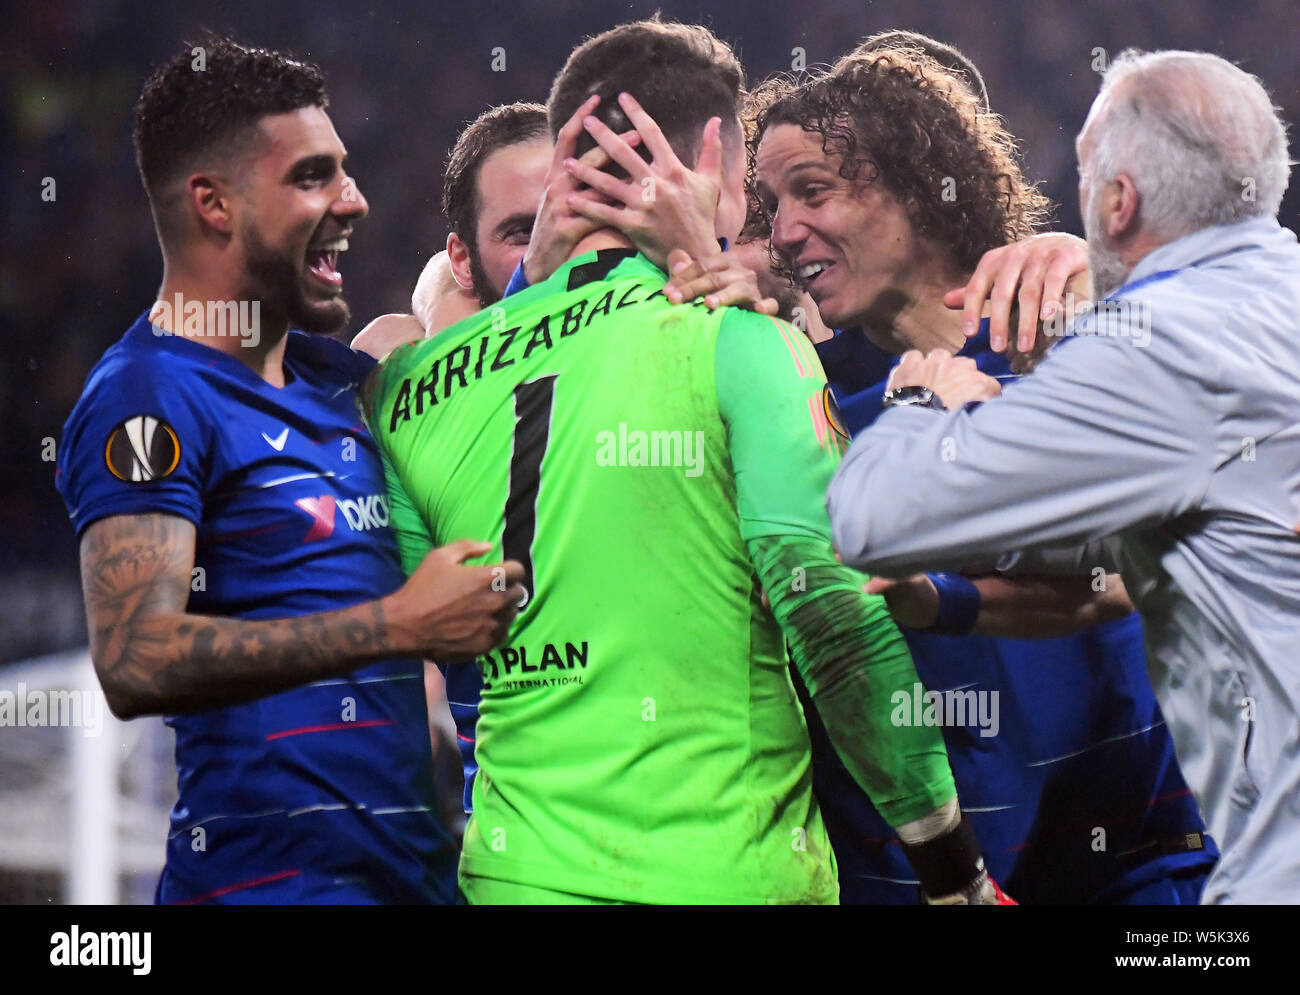 LONDON, ENGLAND - MAY 9, 2019: Emerson Palmieri dos Santos of Chelsea (L), Kepa Arrizabalaga of Chelsea (C) and David Luiz of Chelsea (R) celebrate after the second leg of the 2018/19 UEFA Europa League Semi-Finals game between Chelsea FC (England) and Eintracht Frankfurt e.V. (Germany) at Stamford Bridge. Stock Photo